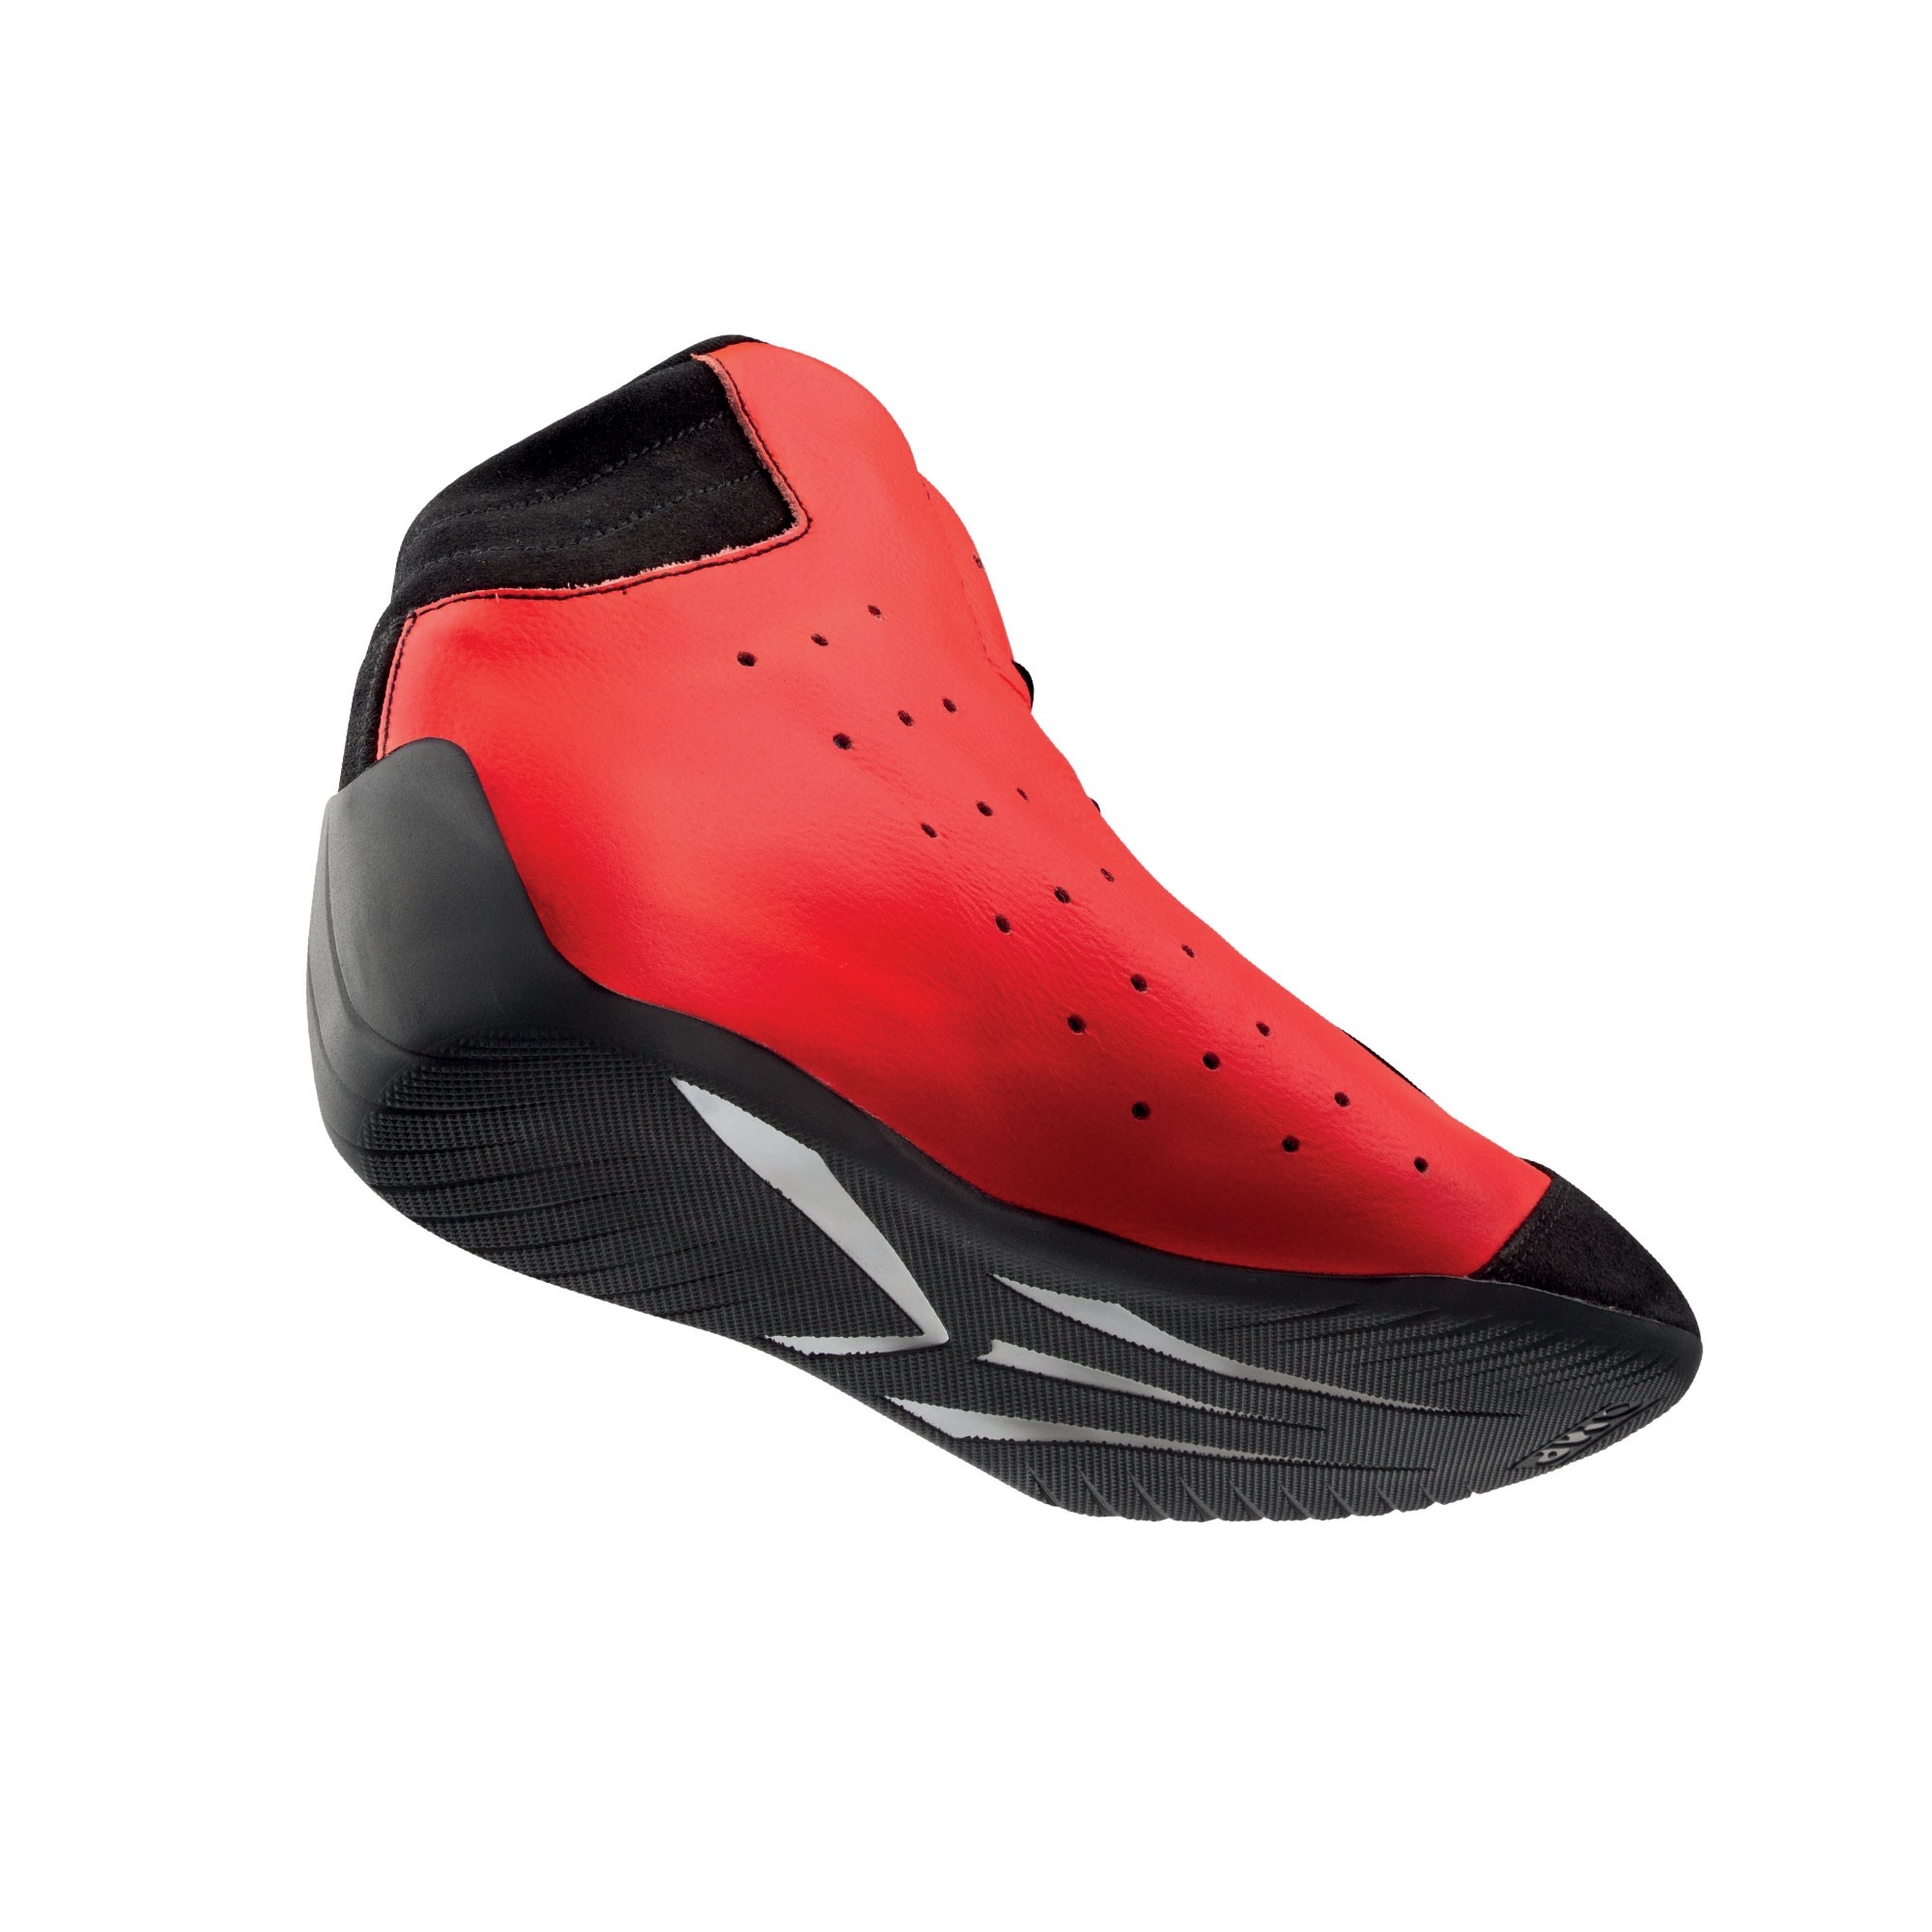 TECNICA SHOES MY2021 - Racing shoes